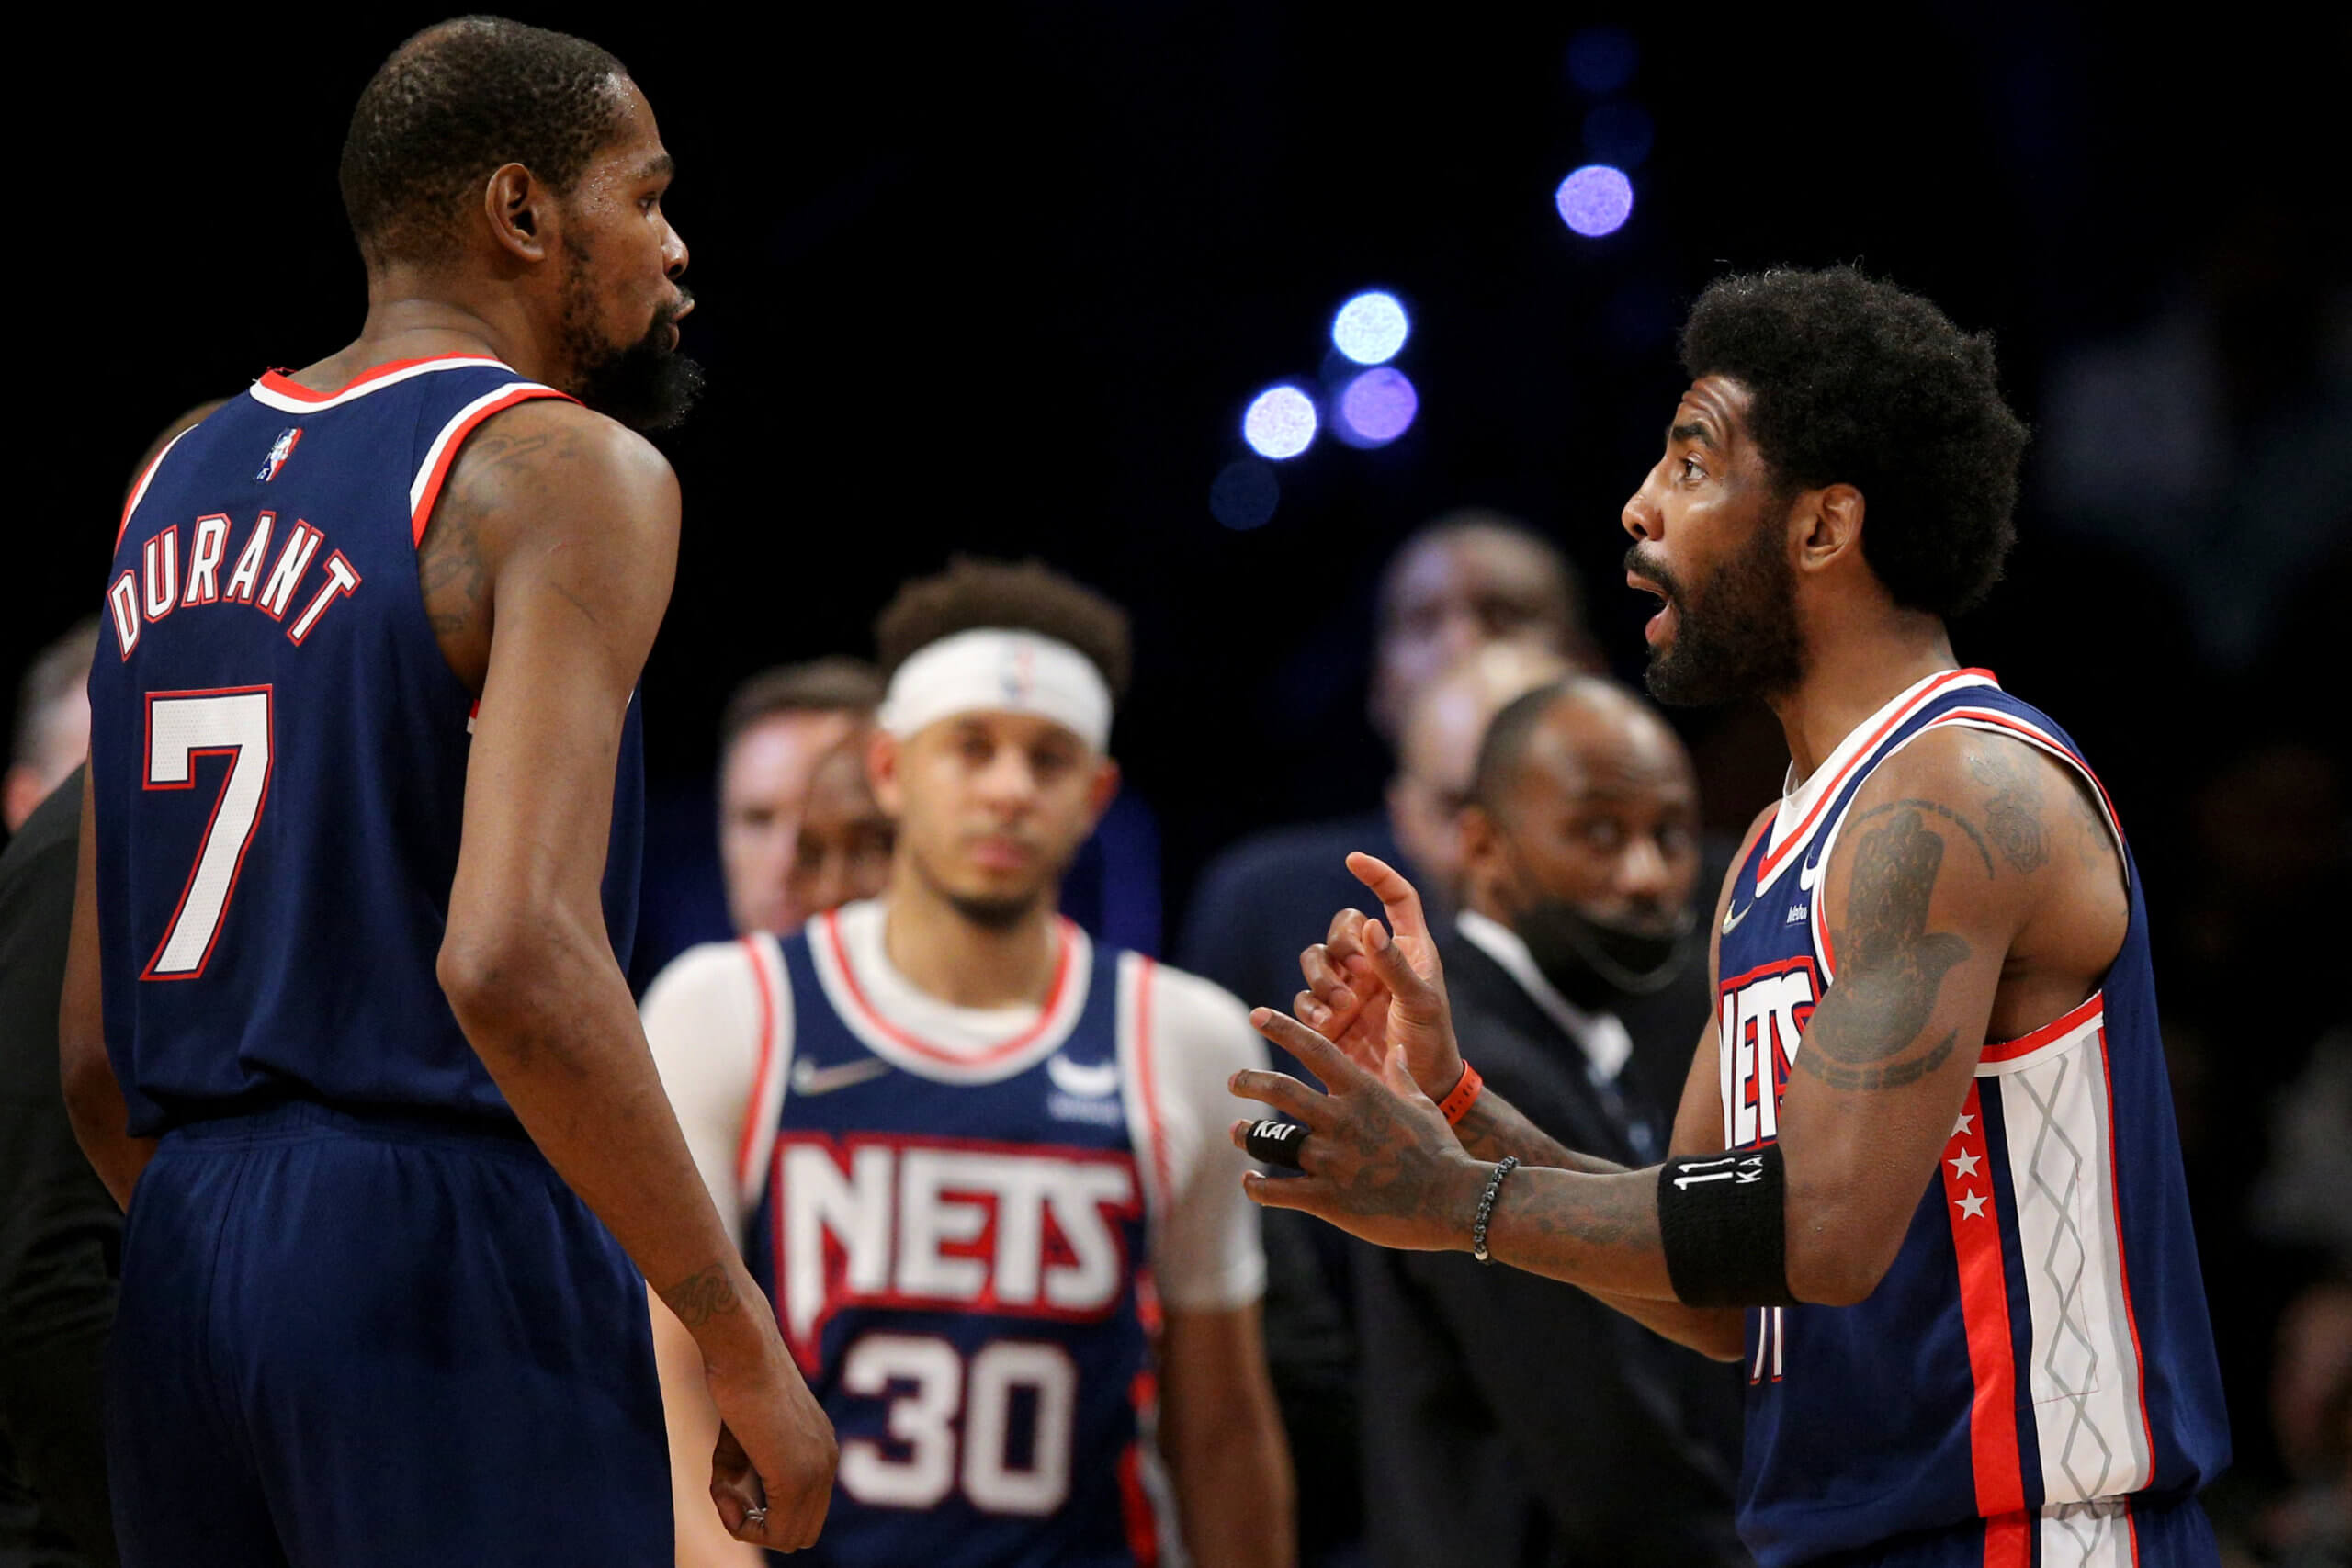 Net gains: Expectations soar in Brooklyn with Durant, Kyrie ready